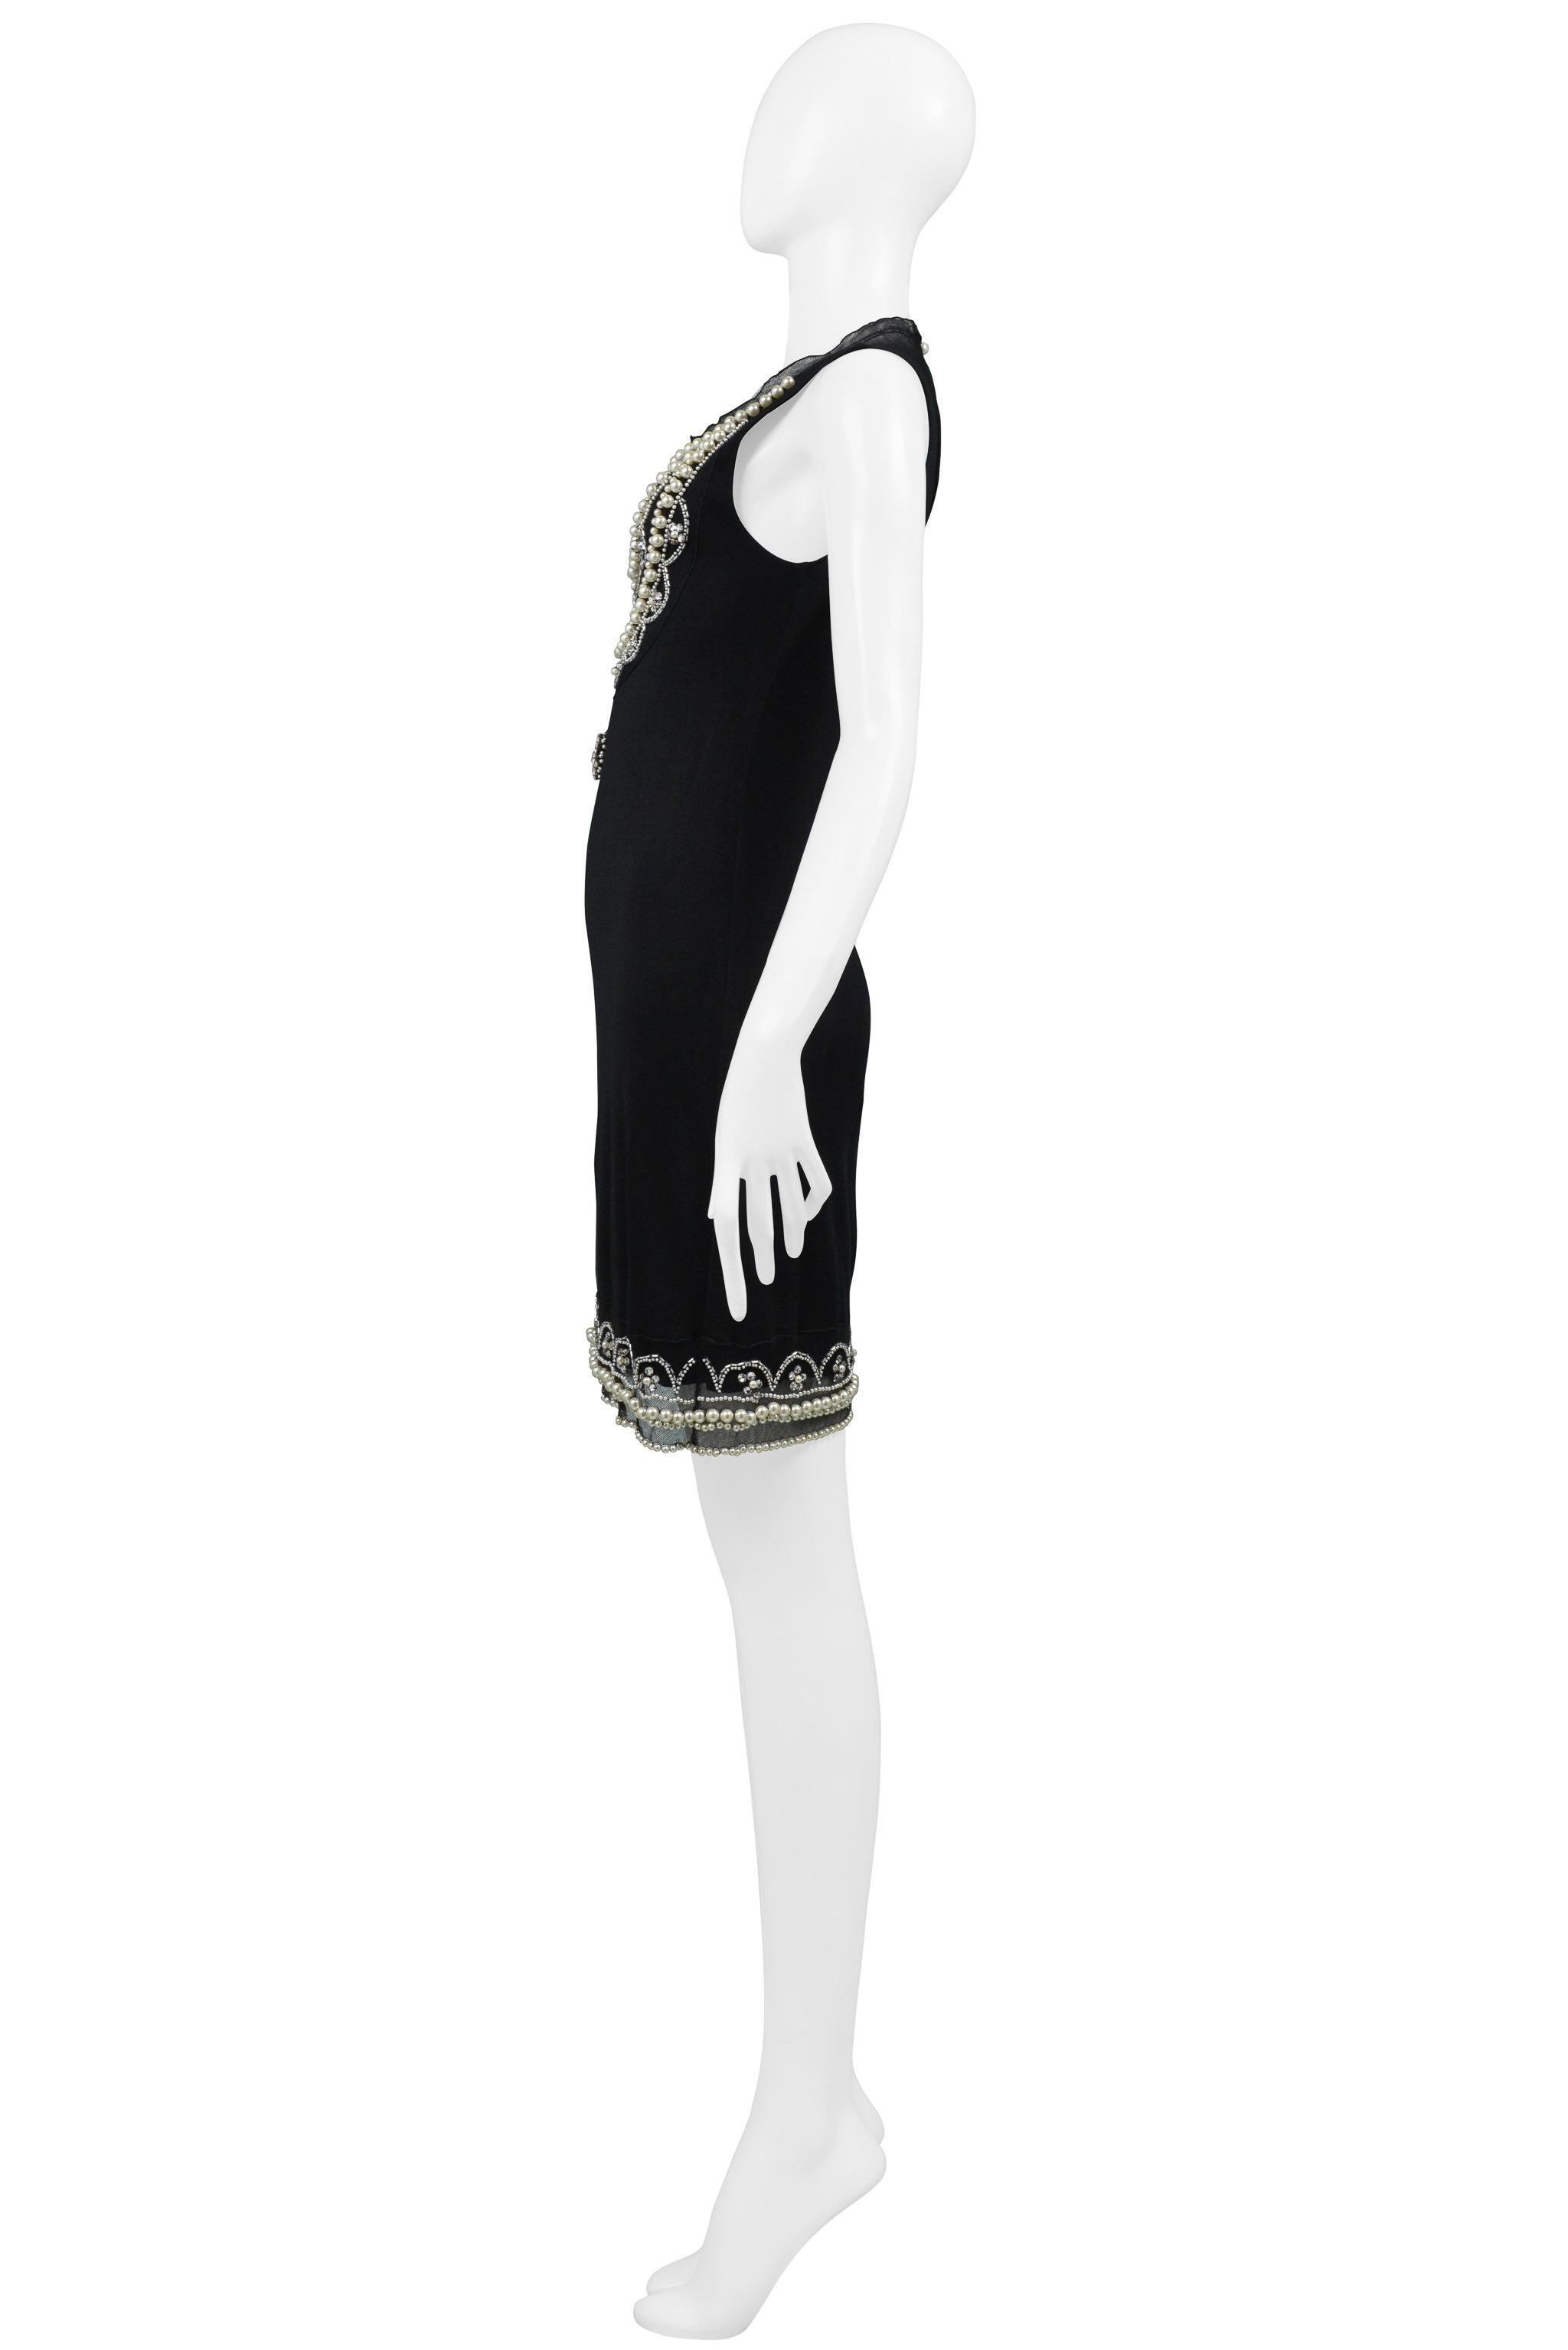 Christian Dior By John Galliano Black Silk Dress With Pearls & Crystals For Sale 1